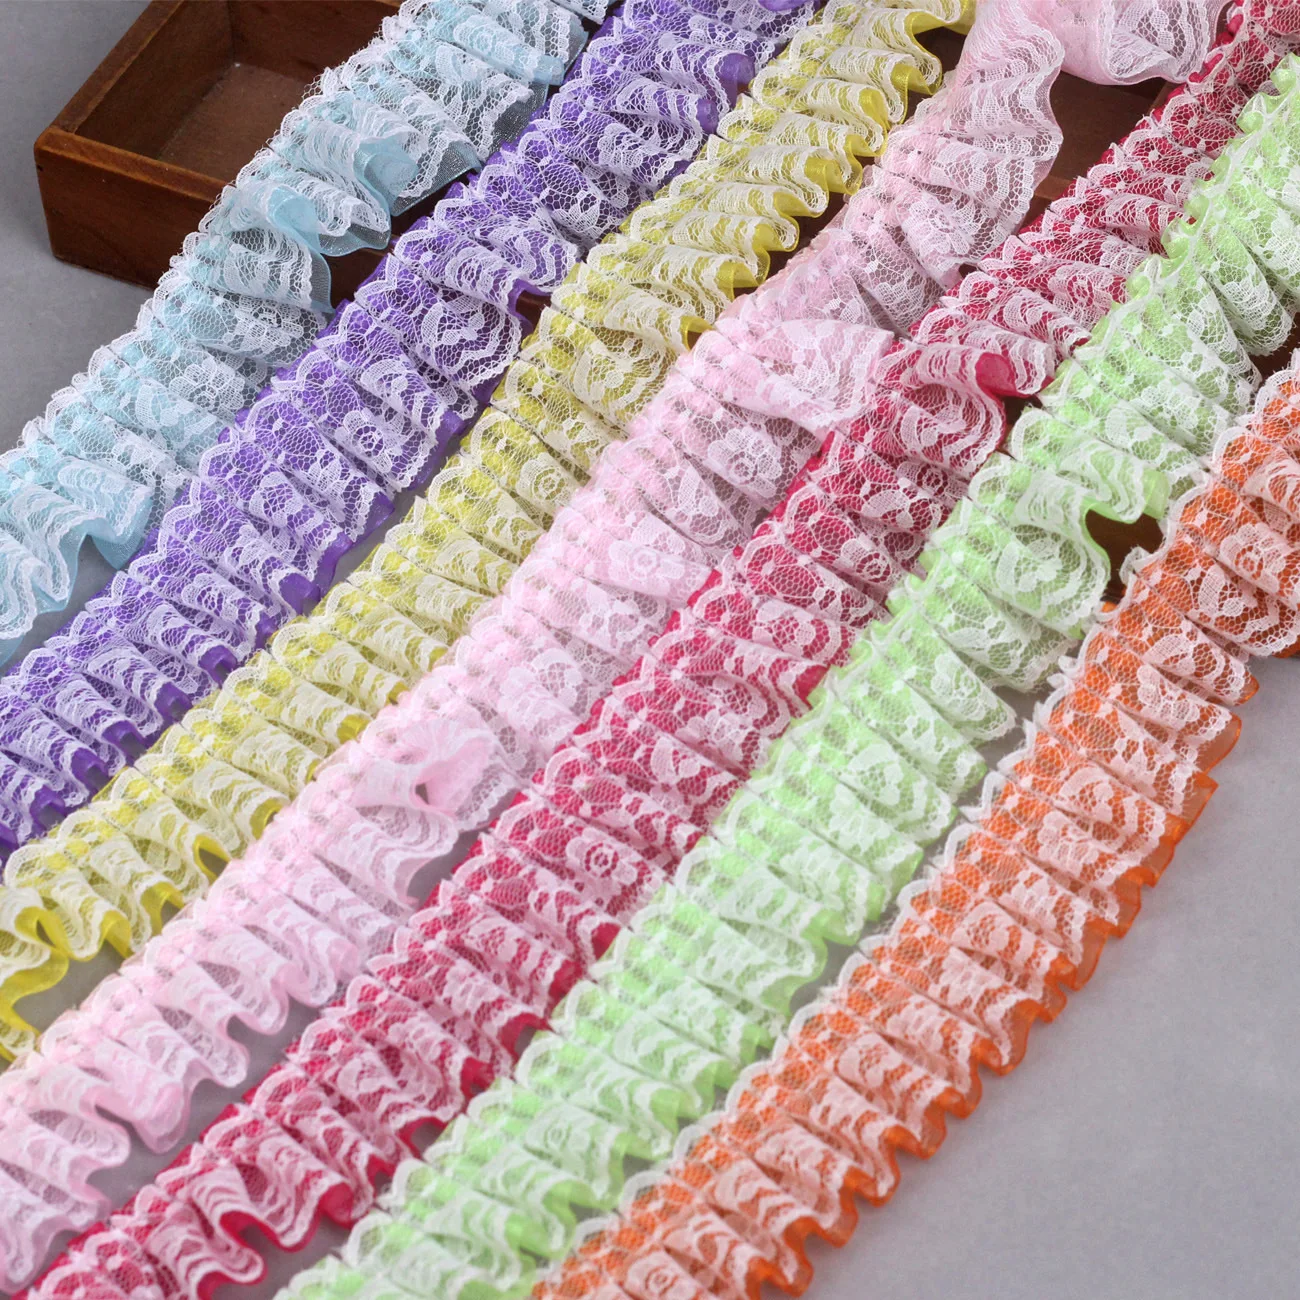 1M Latest Pleated Lace Fabric Ribbon 4cm Blue Purple Lace Trim DIY Sewing Guipure Craft Supplies Pink Green Laces Material KQ40